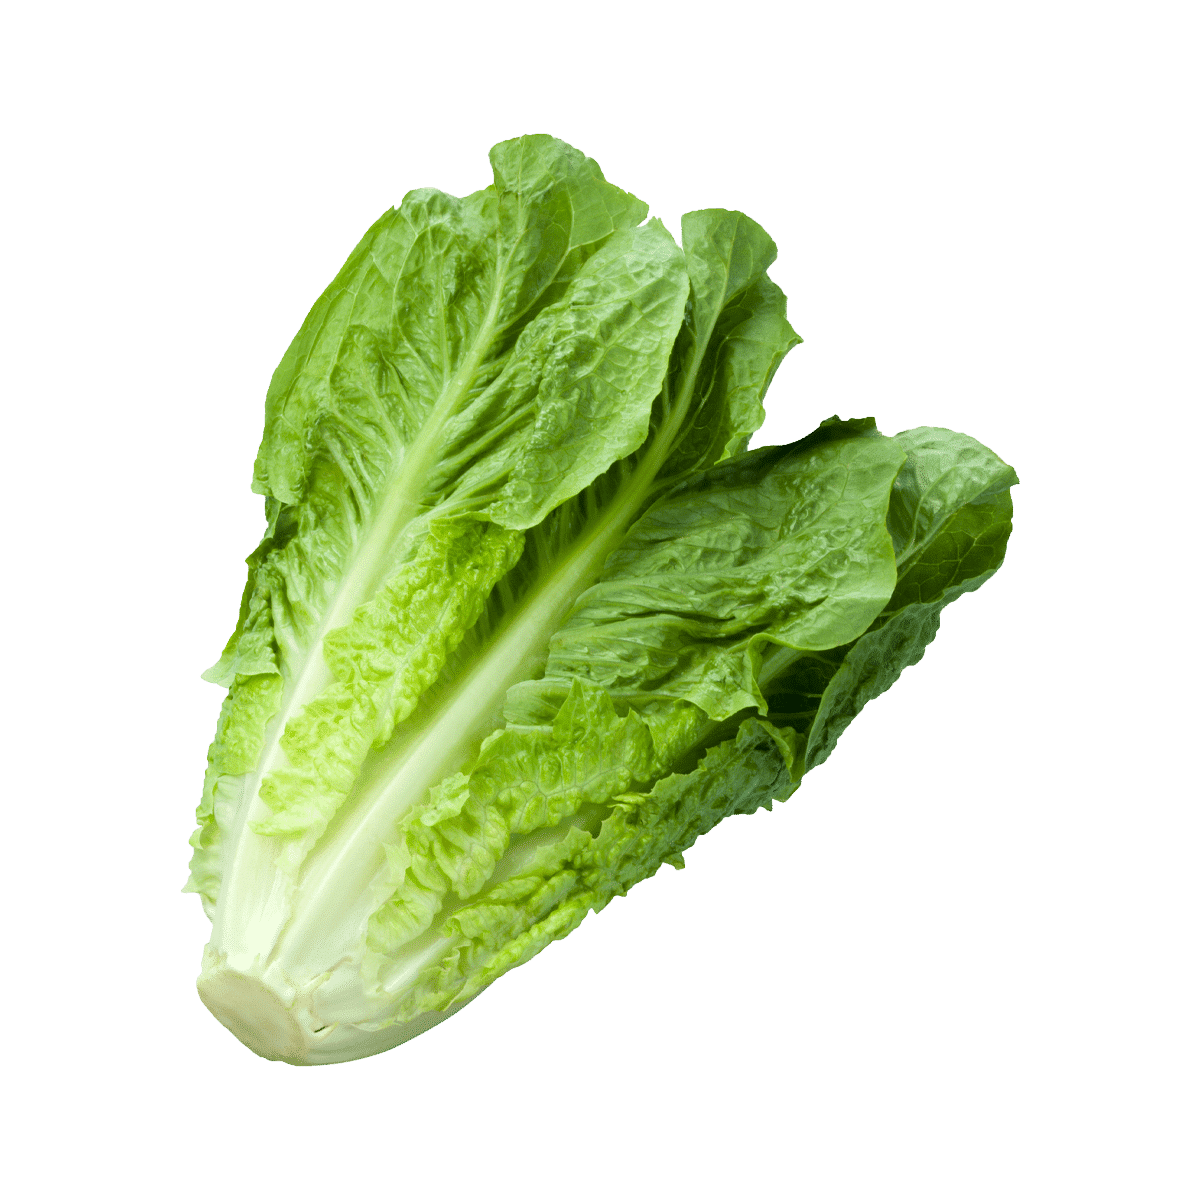 Leafy green suppliers